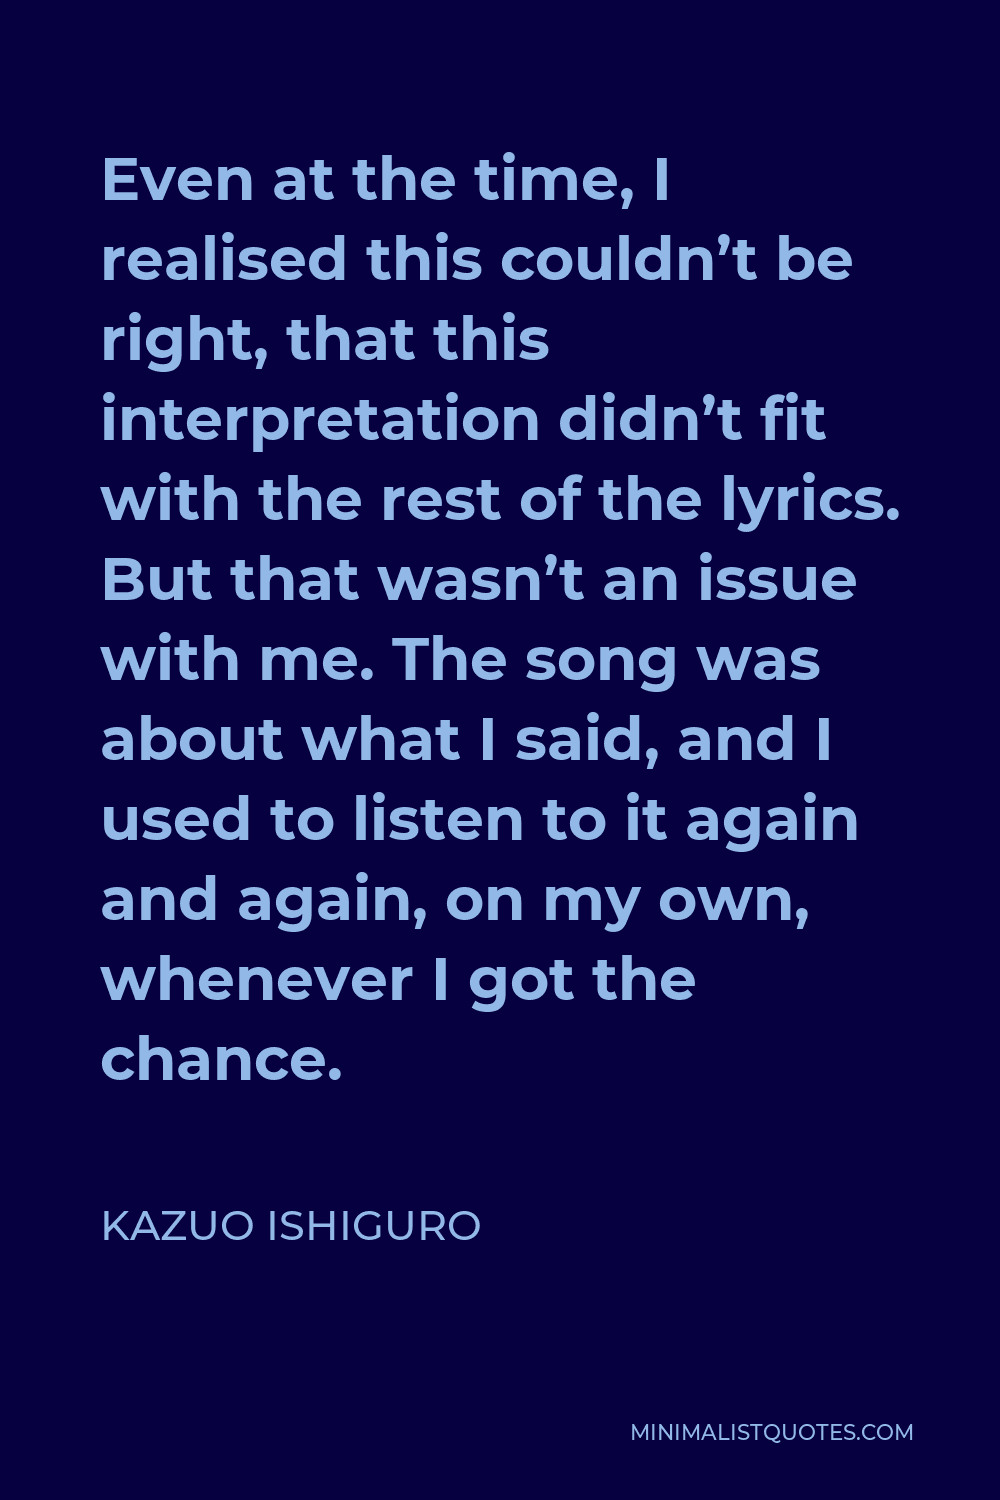 Kazuo Ishiguro Quote - Even at the time, I realised this couldn’t be right, that this interpretation didn’t fit with the rest of the lyrics. But that wasn’t an issue with me. The song was about what I said, and I used to listen to it again and again, on my own, whenever I got the chance.